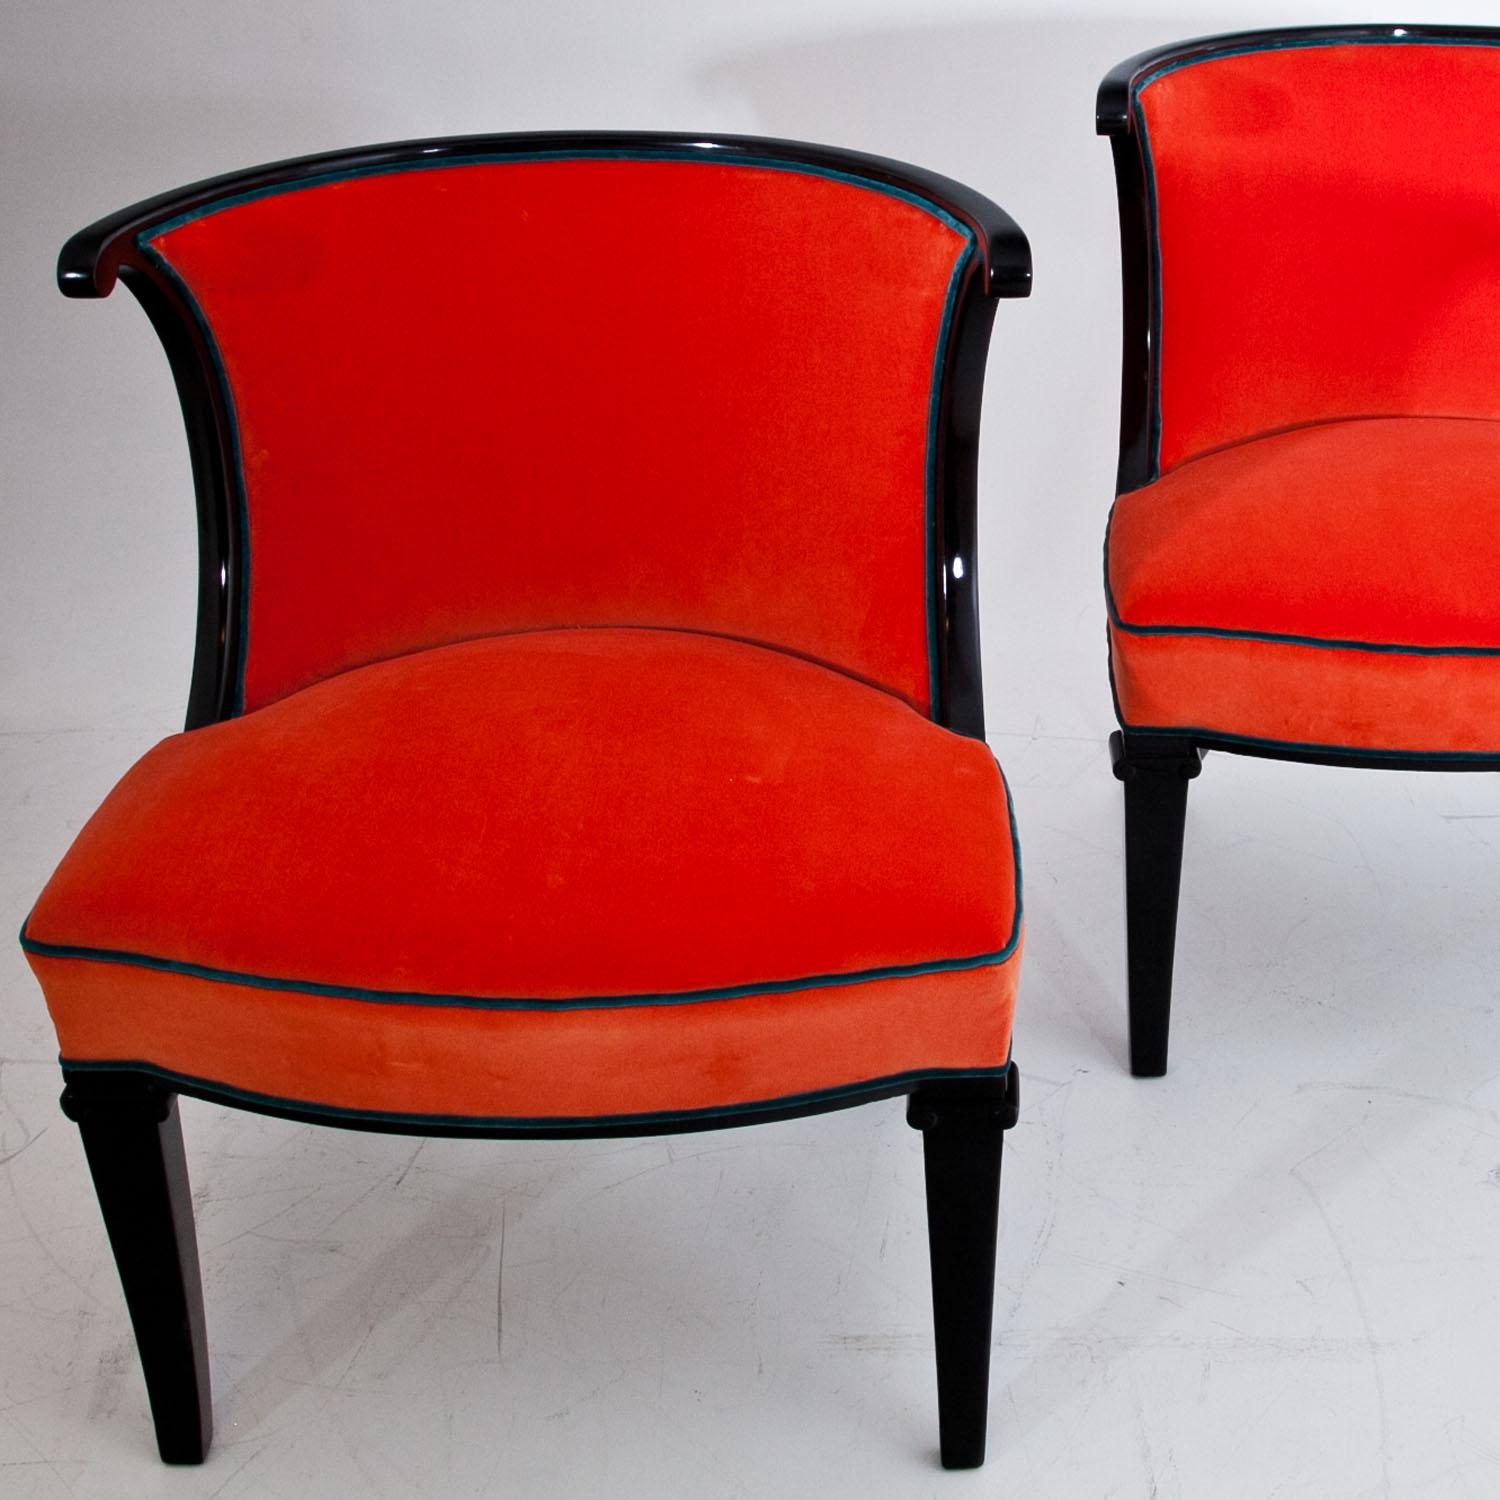 Pair of armchairs with rounded backrests and an ebonized frame, the front legs with volute capitals and the rear legs are slightly curved. The chairs were reupholstered with a high quality orange fabric with blue piping. 

Seat depth: 45 cm.